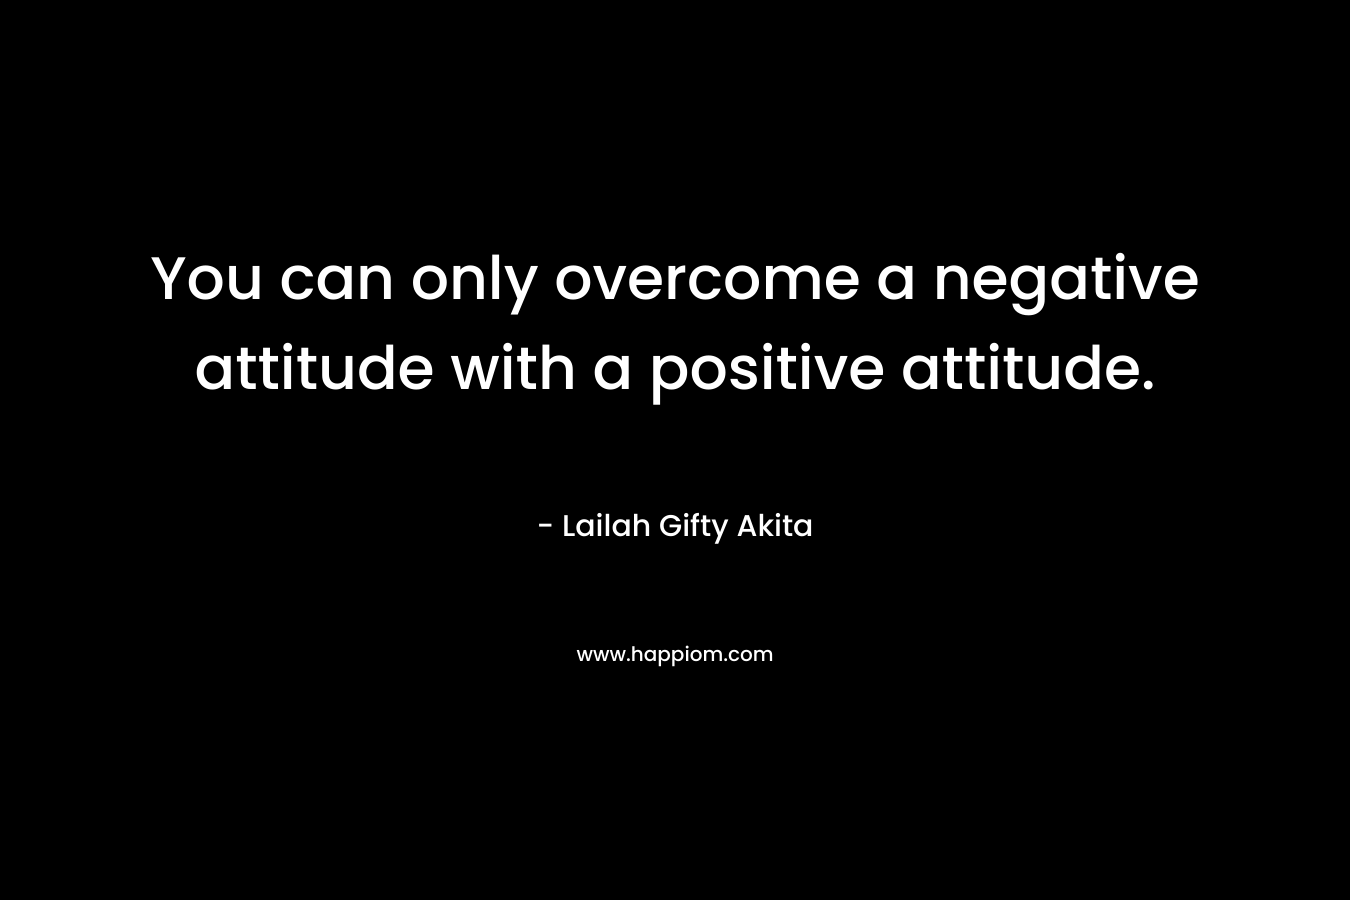 You can only overcome a negative attitude with a positive attitude.